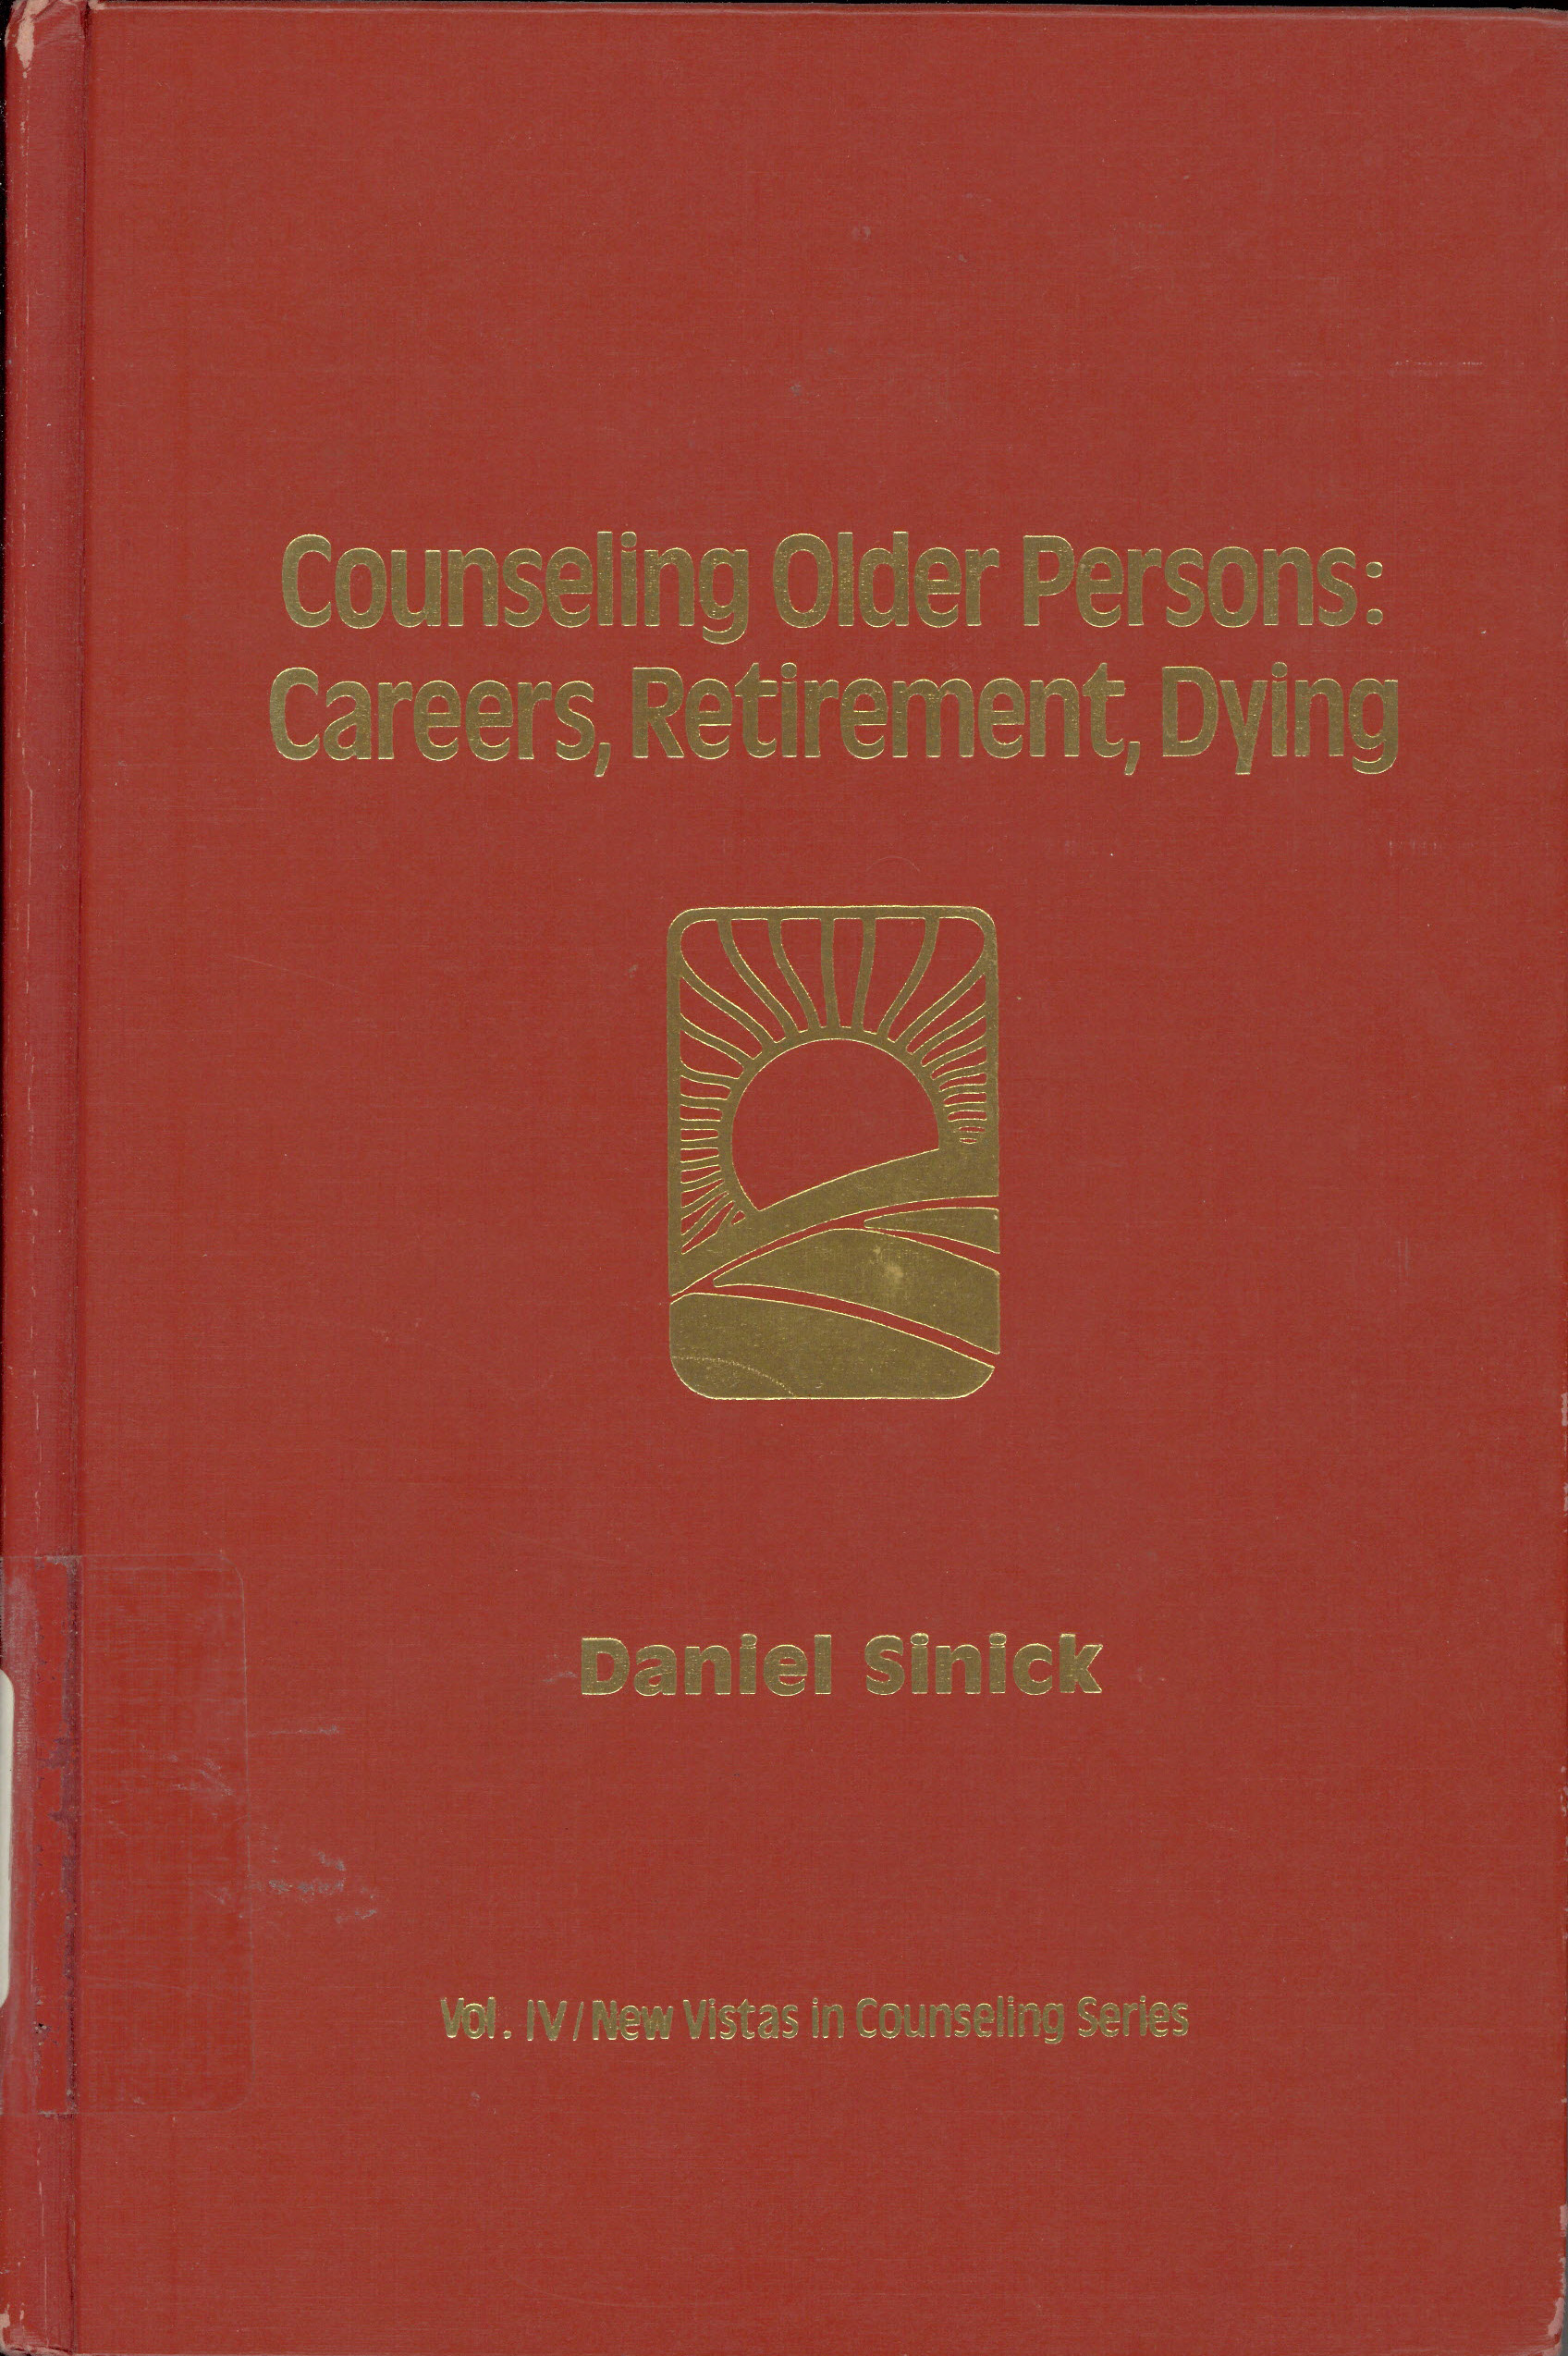 Counseling older persons : careers, retirement, dying